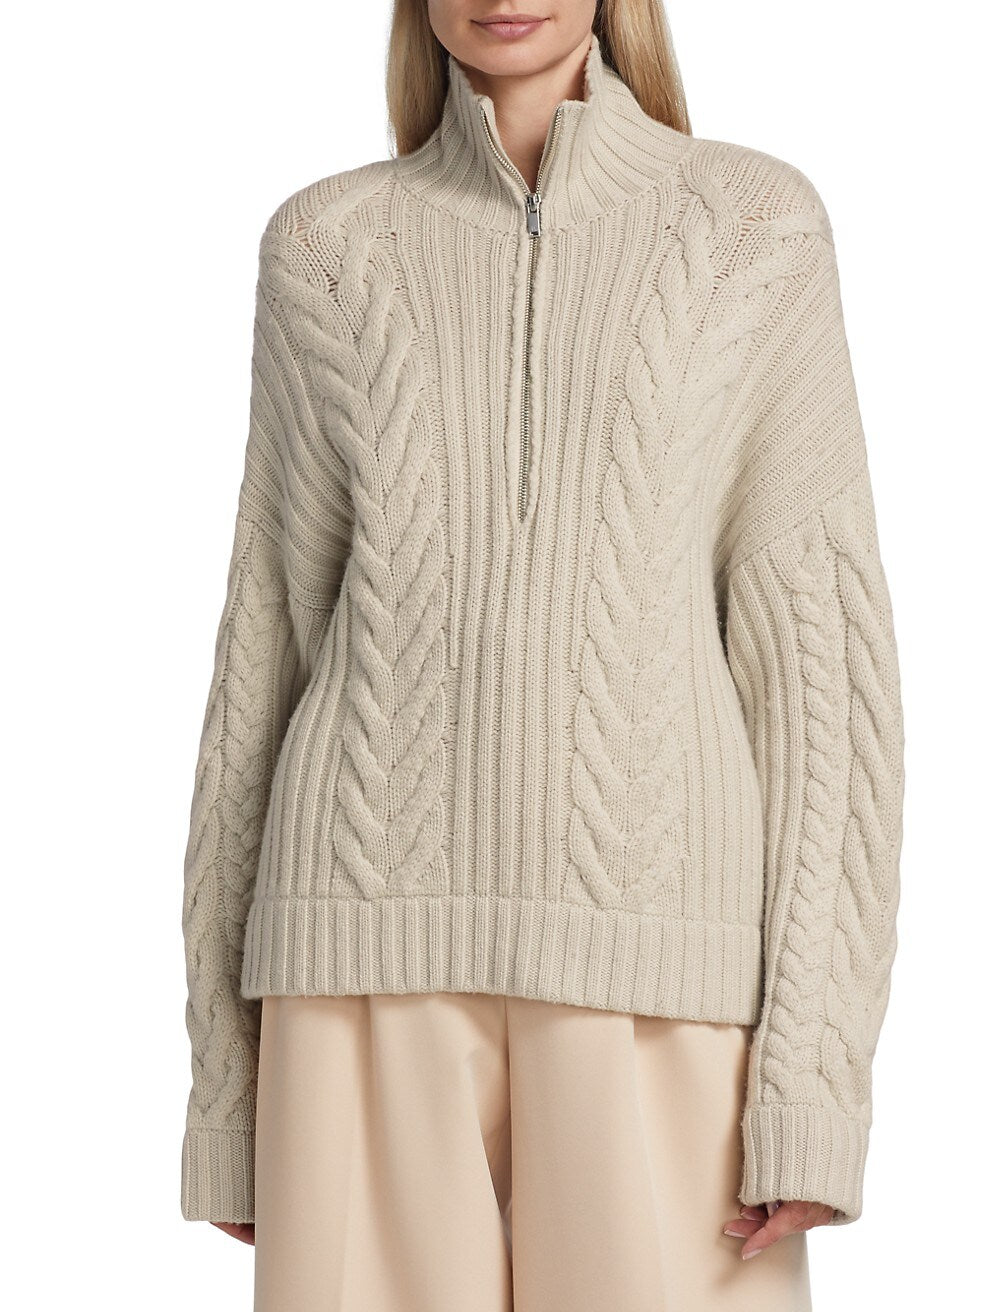 WOOL CASHMERE OPEN BACK CABLE QUARTER ZIP